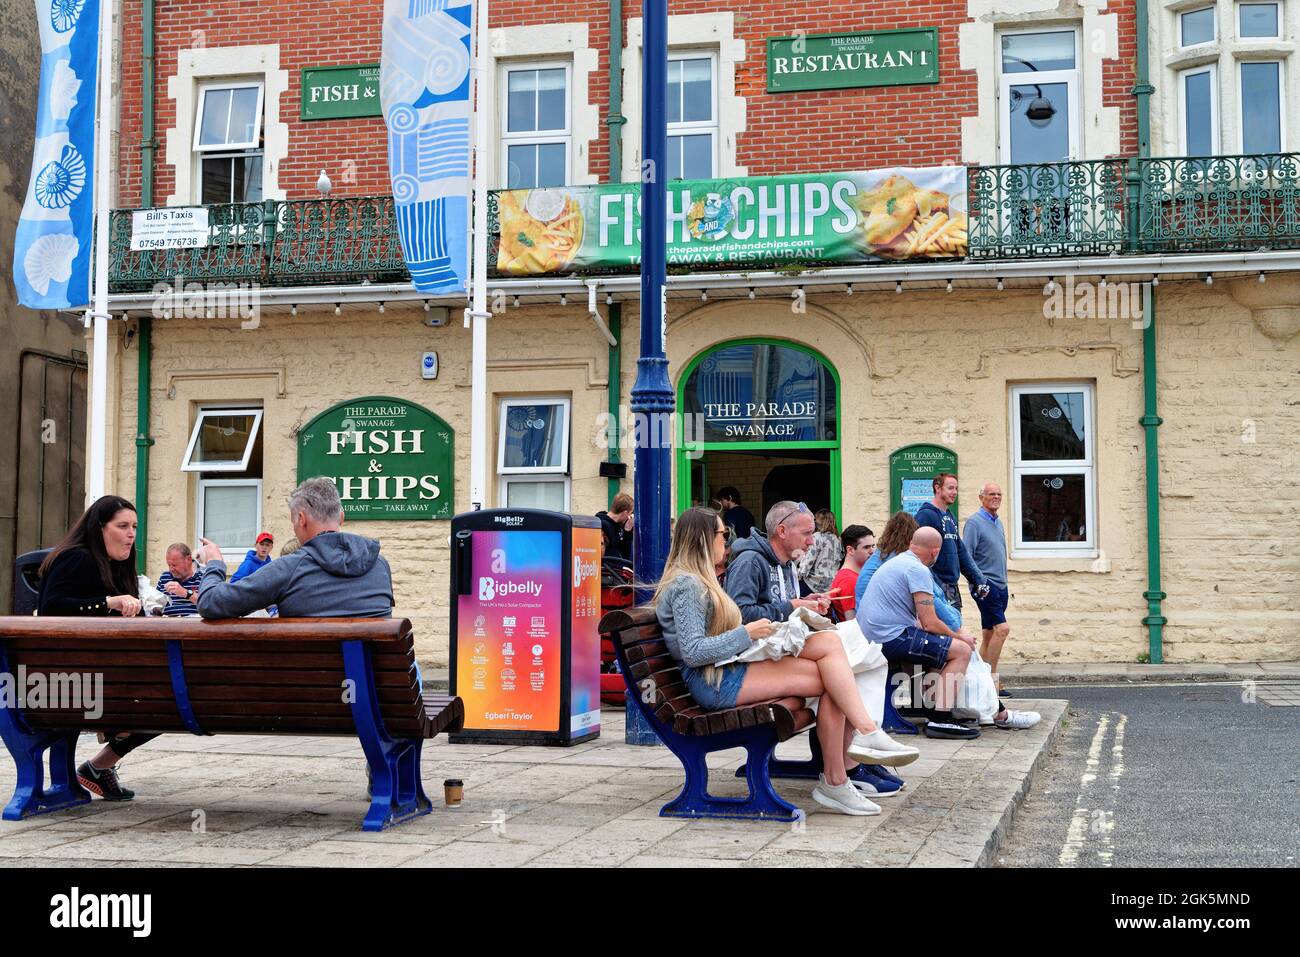 Holidaymakers enjoying fish and chips outside the Parade fish and chip restaurant in The Square, Swanage Dorset England UK Stock Photo